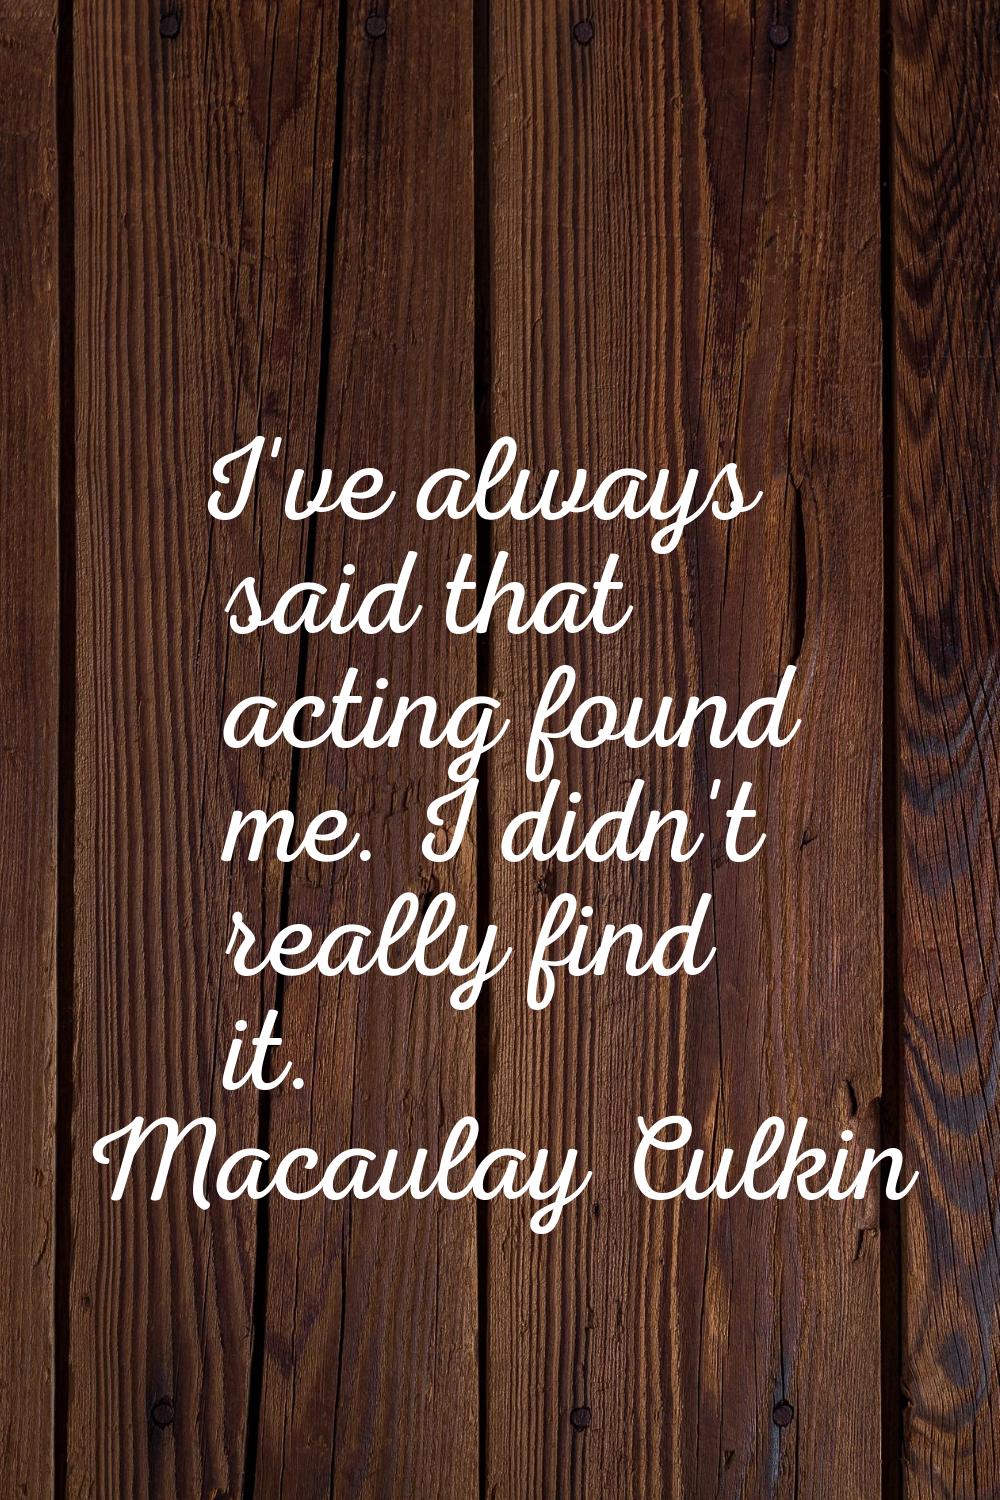 I've always said that acting found me. I didn't really find it.